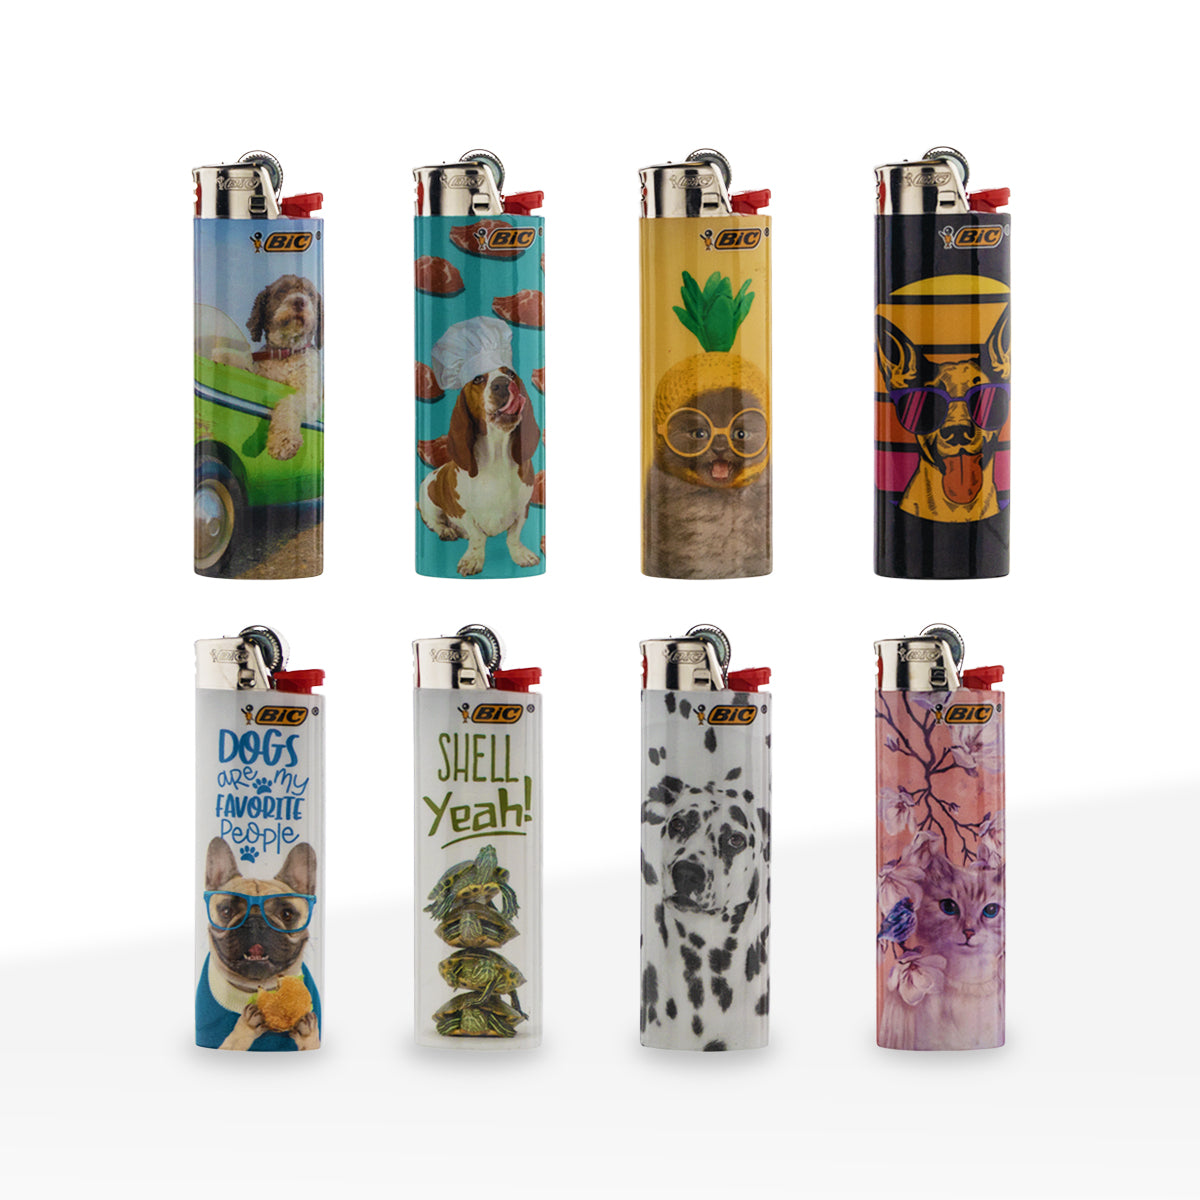 BIC® | 'Retail Display' Animal Lovers Special Edition Lighters | 50 Count Lighters BIC   